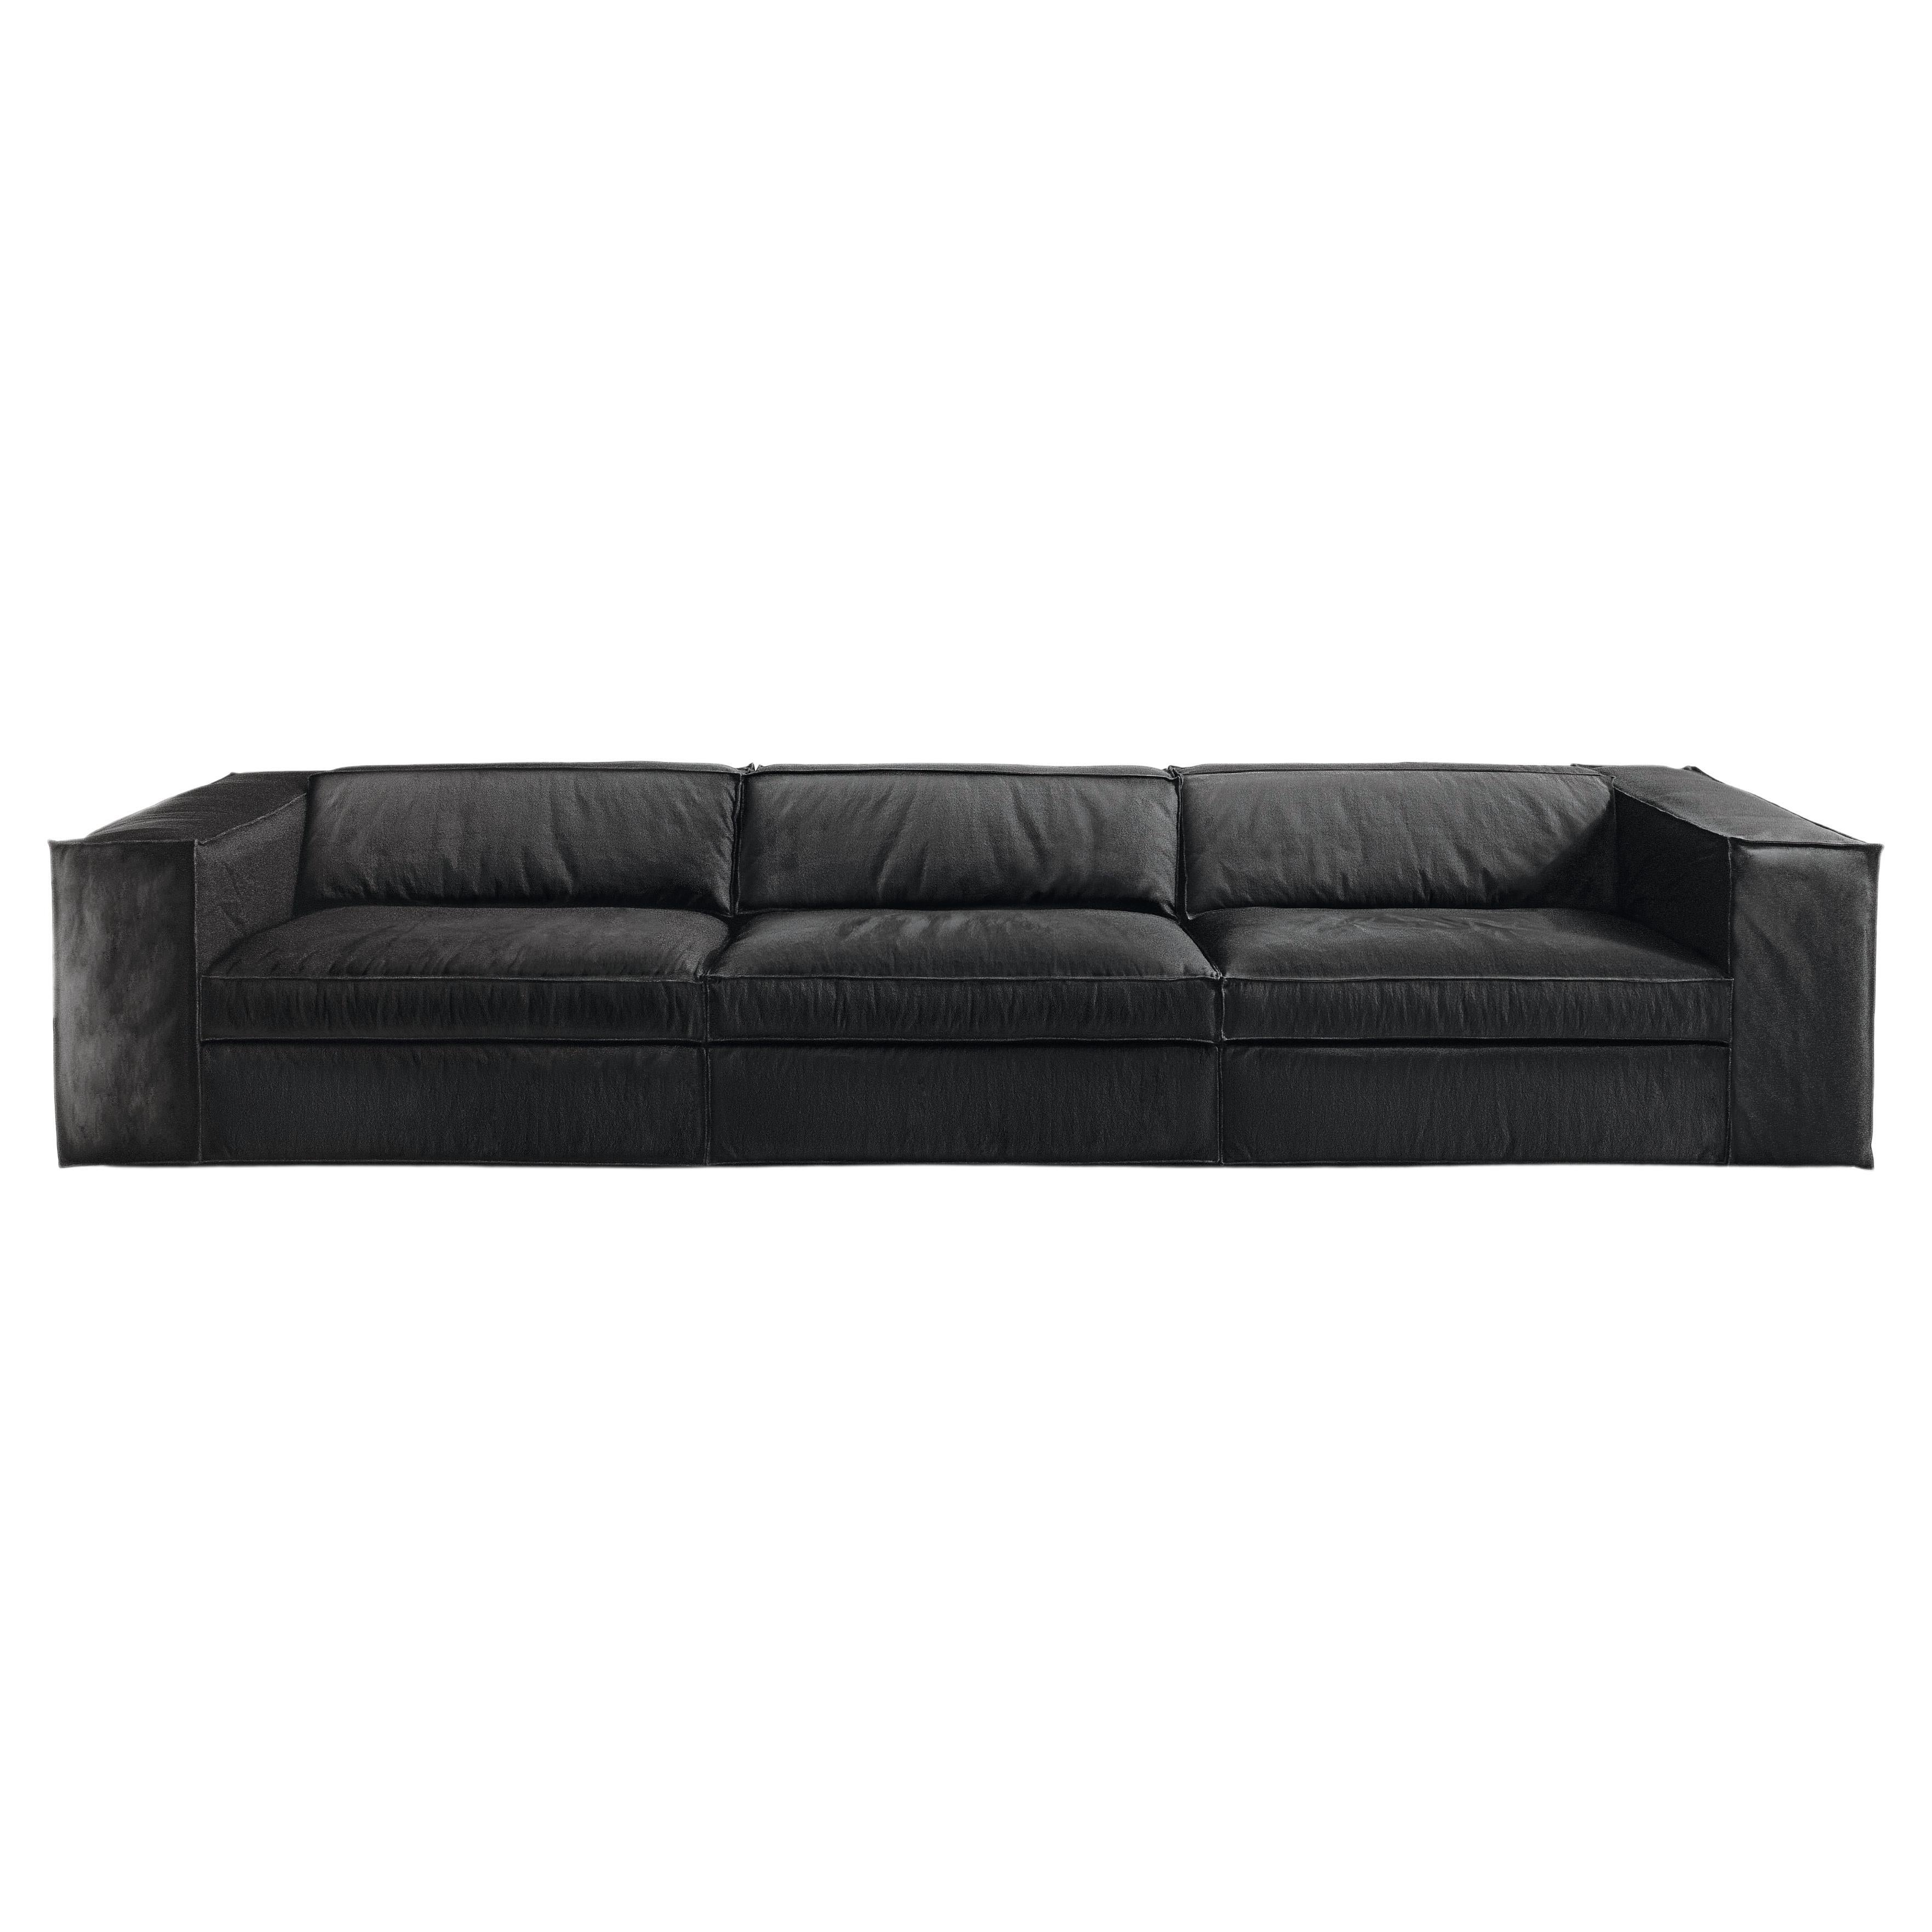 Up Small 3-Seat Sofa in Braided Black Upholstery by Giuseppe Viganò For Sale